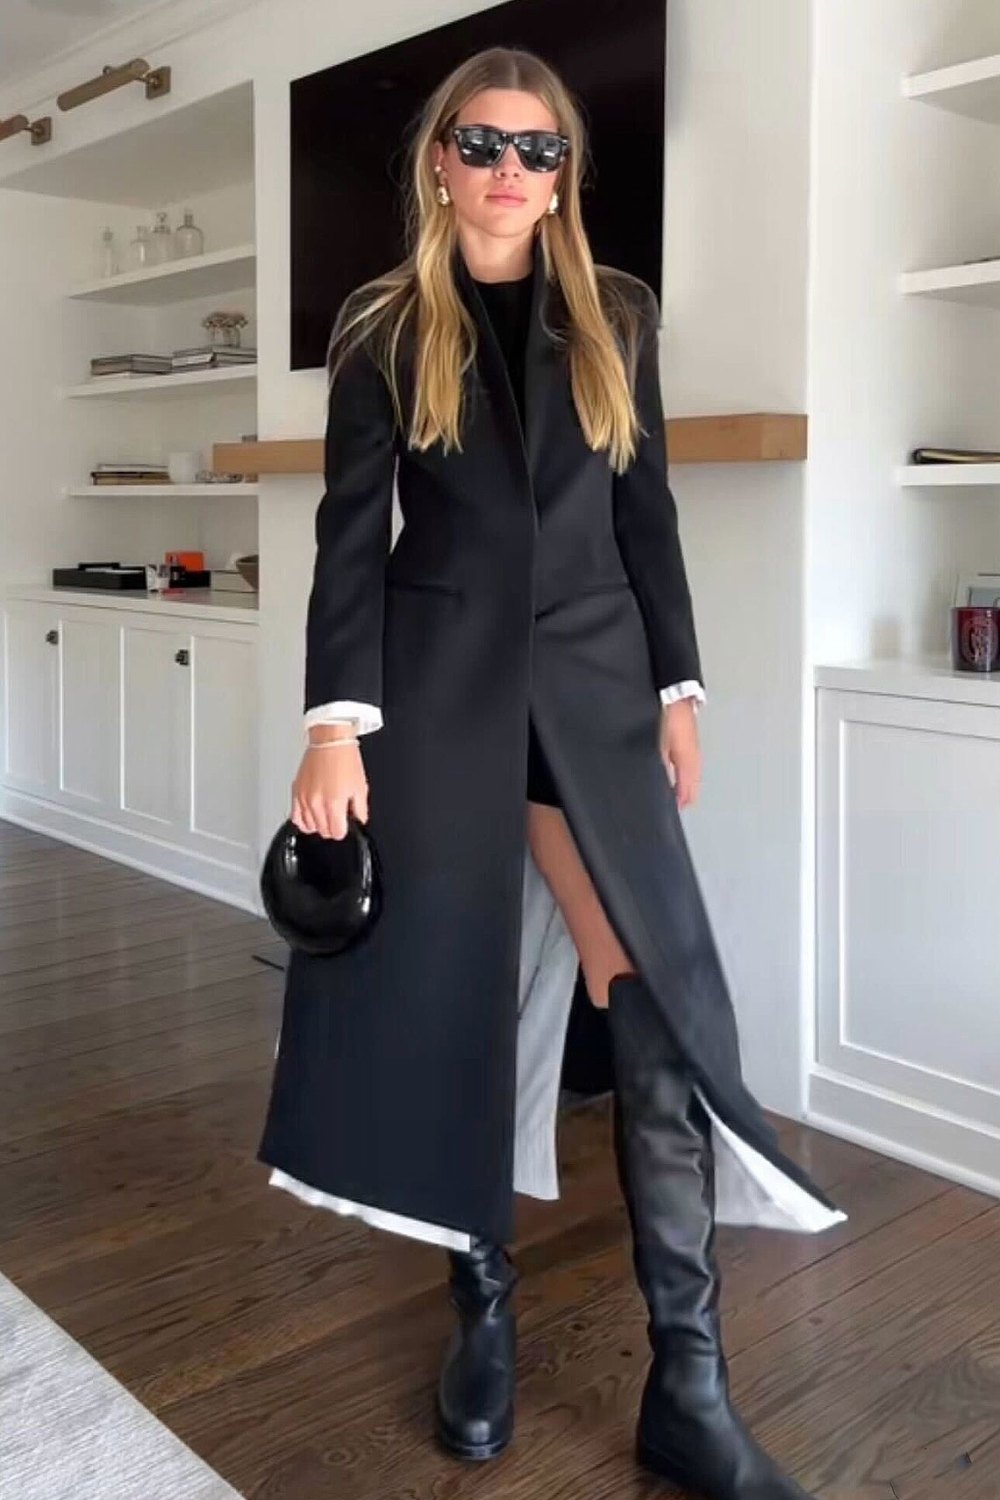 Sofia Richie Is Inspiring Us With Her Fabulous Fall Outfits